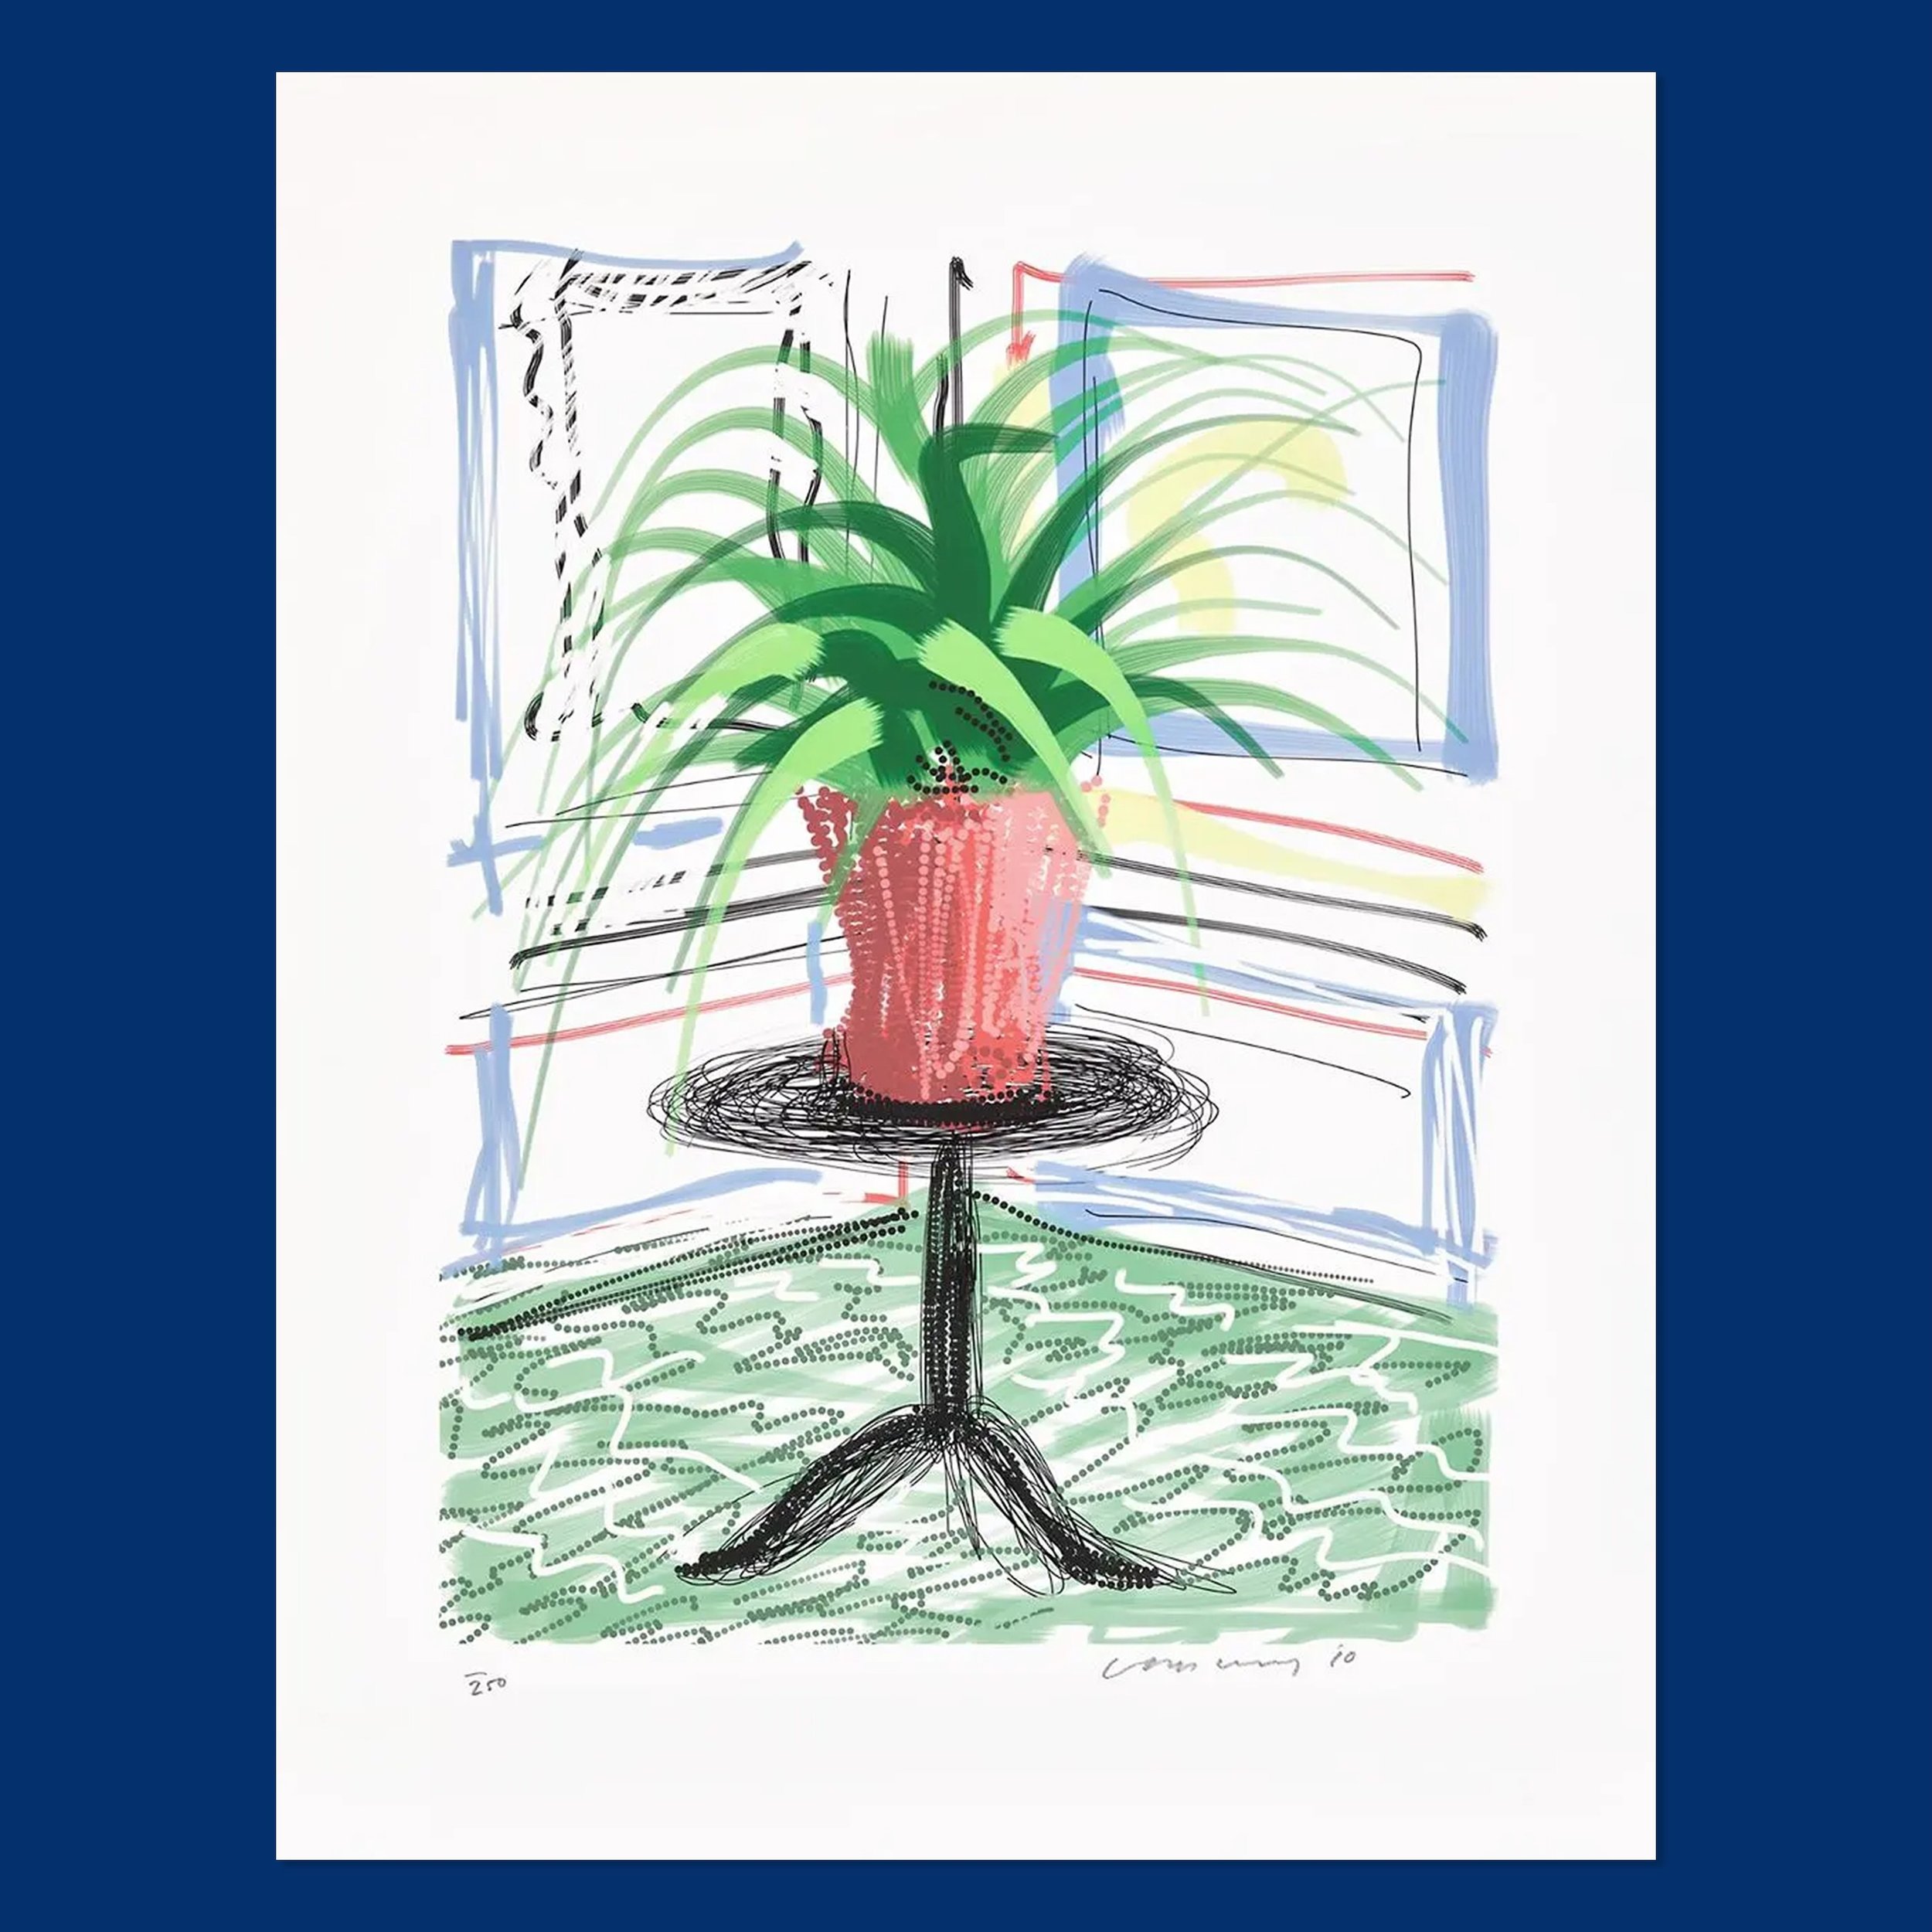 Regarded as one of the most influential figures in contemporary art, British artist David Hockney&rsquo;s artistic journey began in the 1960s when he emerged as a leading figure in the Pop Art movement. &lsquo;Untitled No.468&rsquo; was released as p